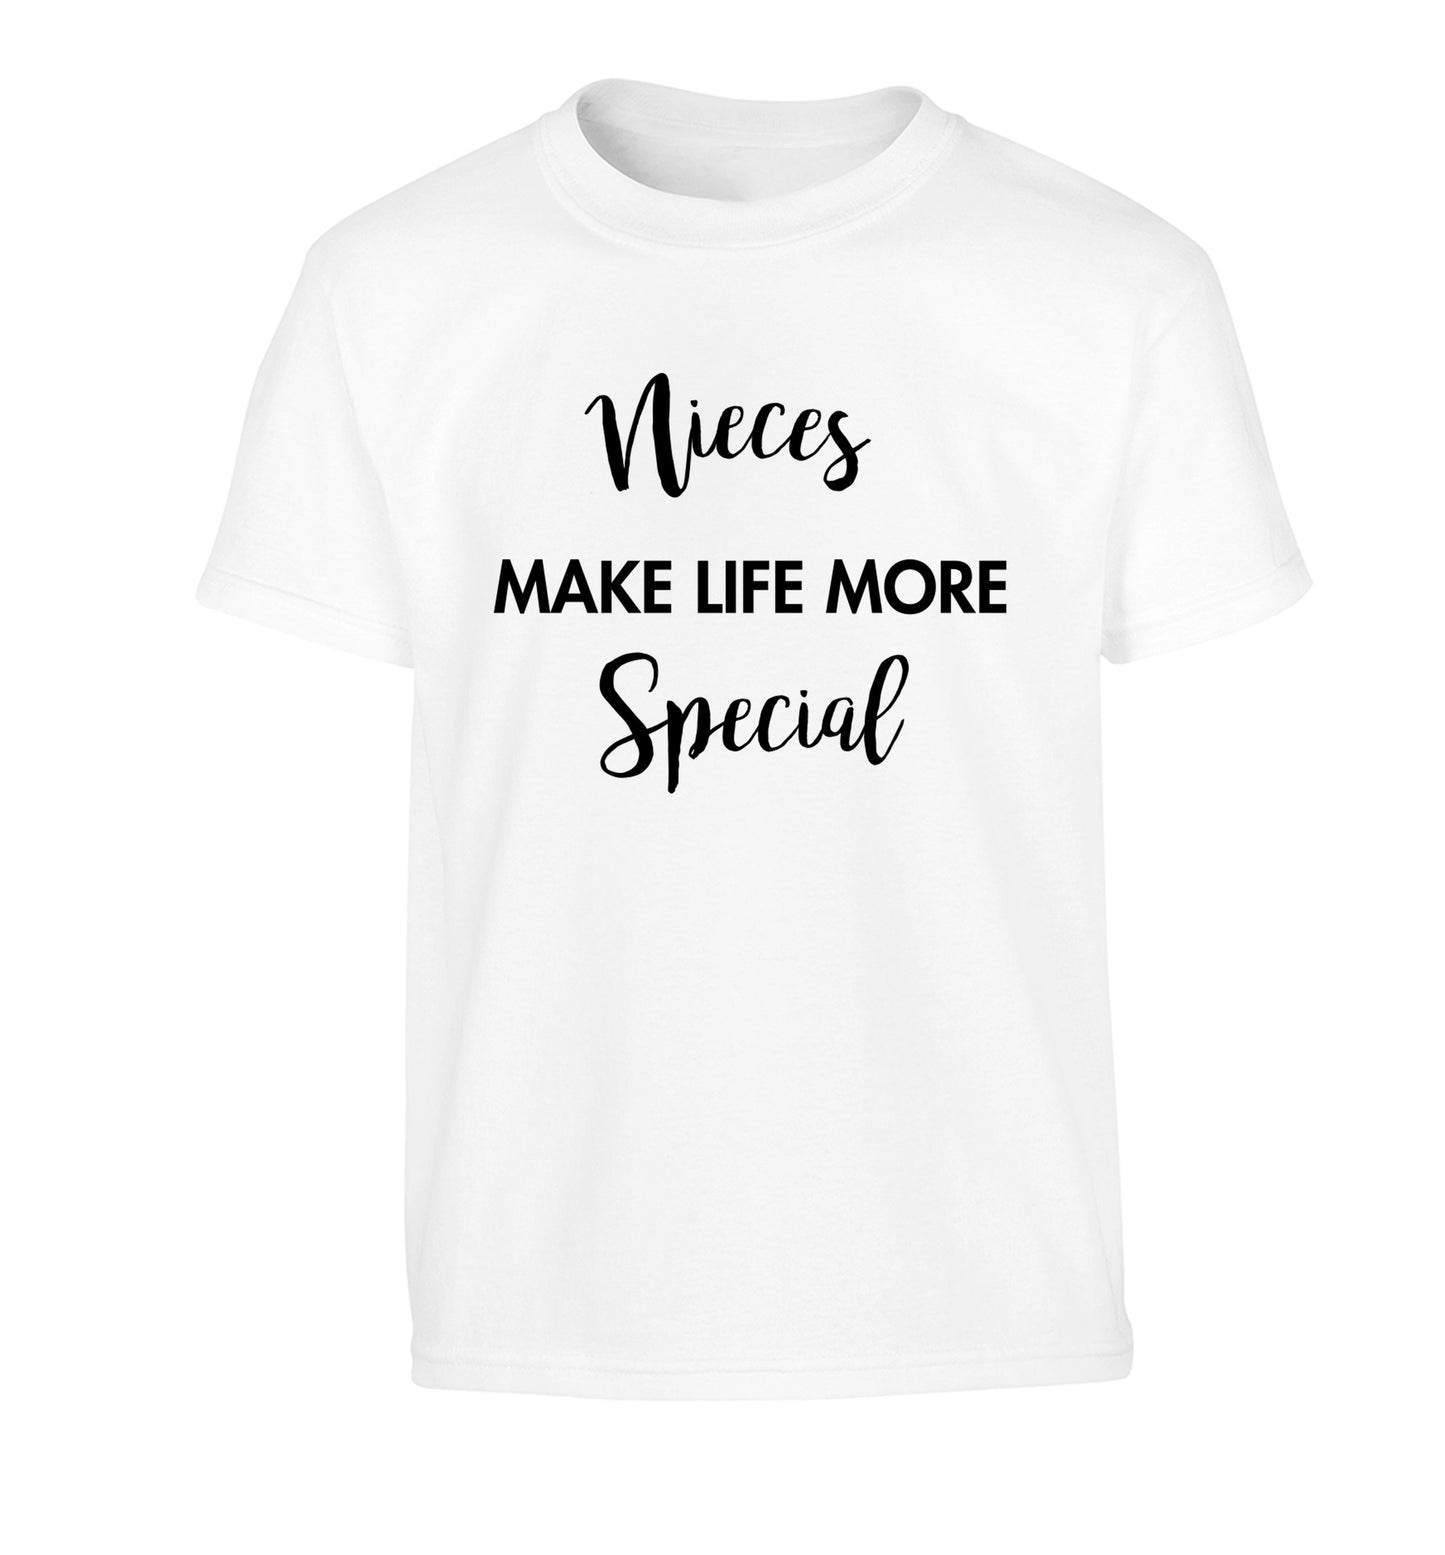 Nieces make life more special Children's white Tshirt 12-14 Years